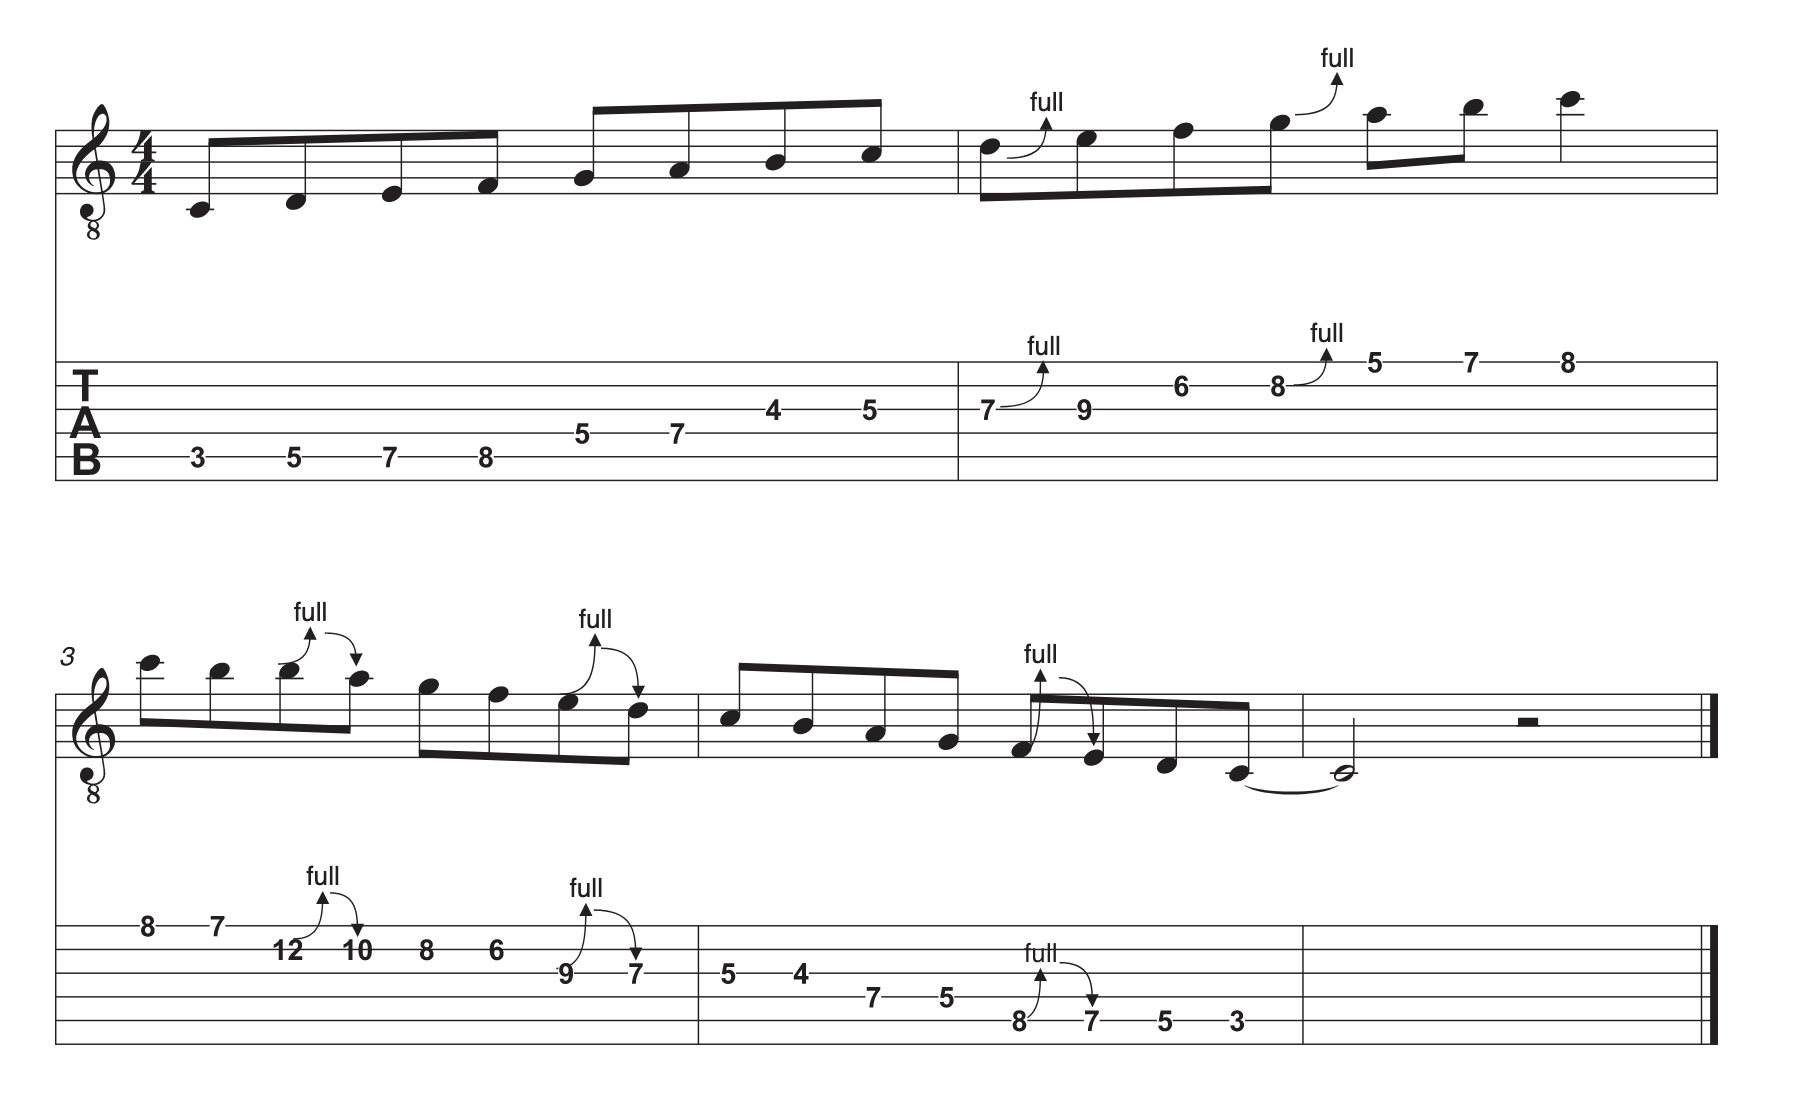 Musical notation shows how to bend a string on a guitar in the key of C major.